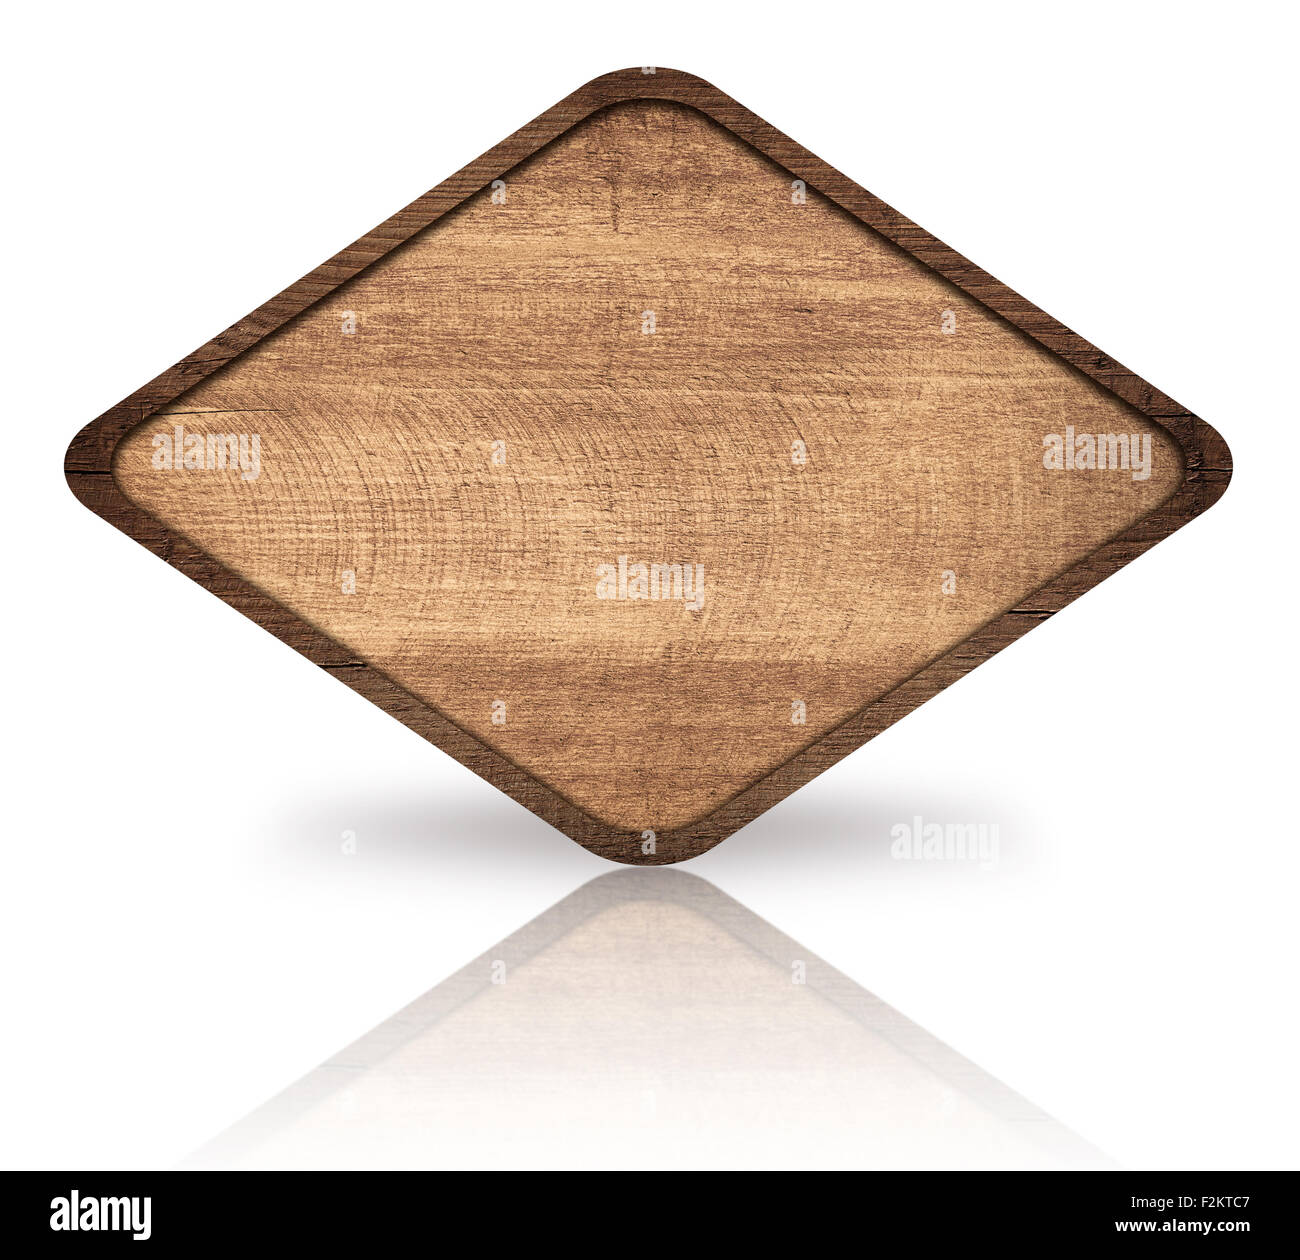 Brown wooden rhombus with dark frame, signboard and reflection on glass table Stock Photo